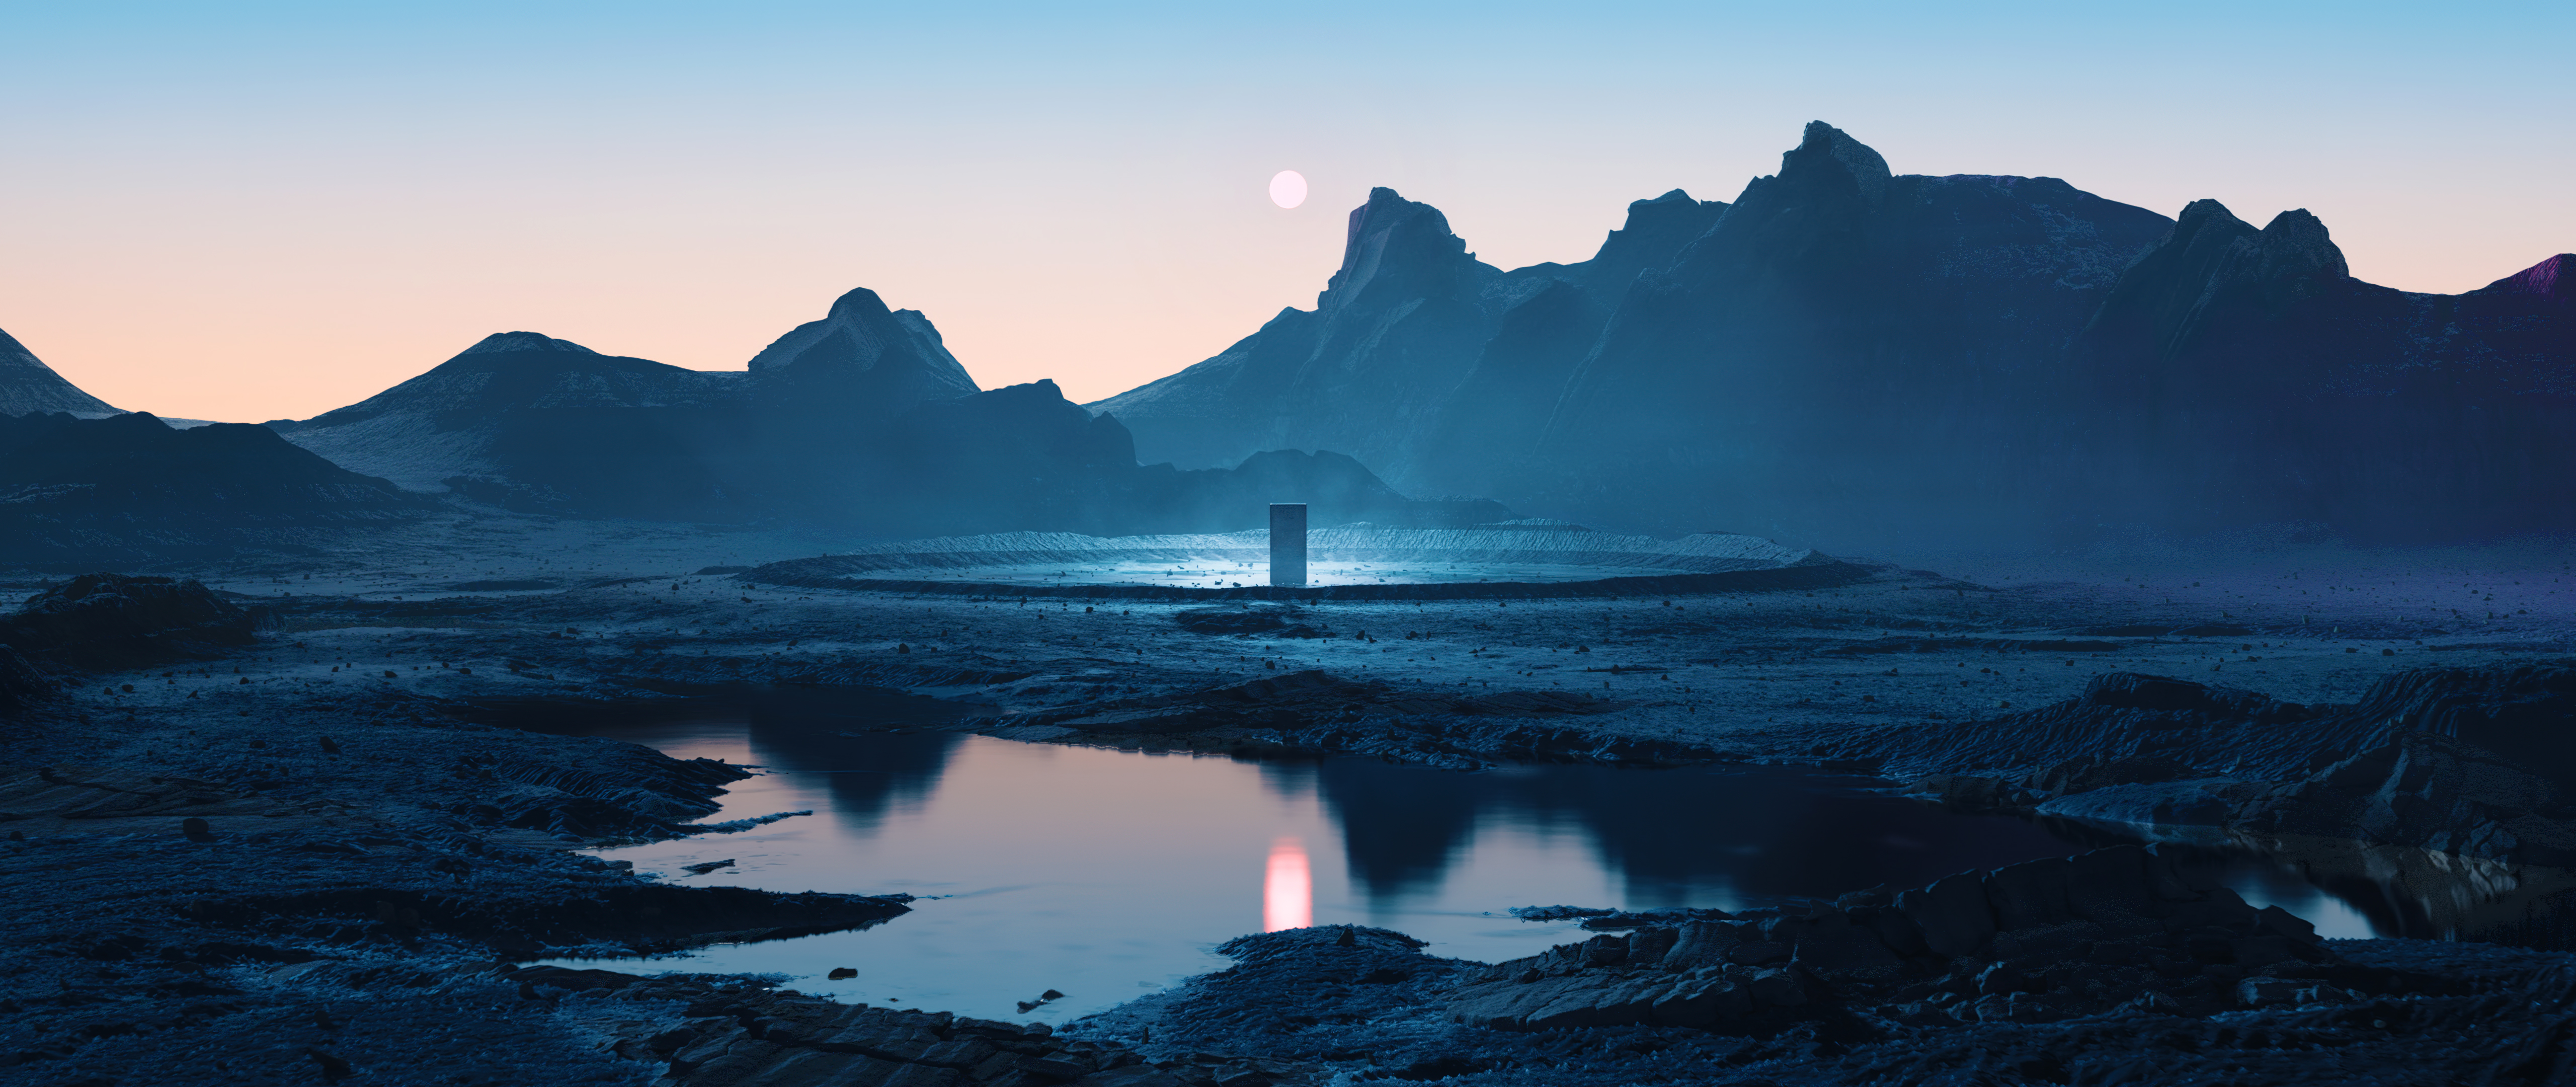 General 5120x2160 landscape CGI sunset lake reflection ultrawide nature mountains Monolith surreal sky water